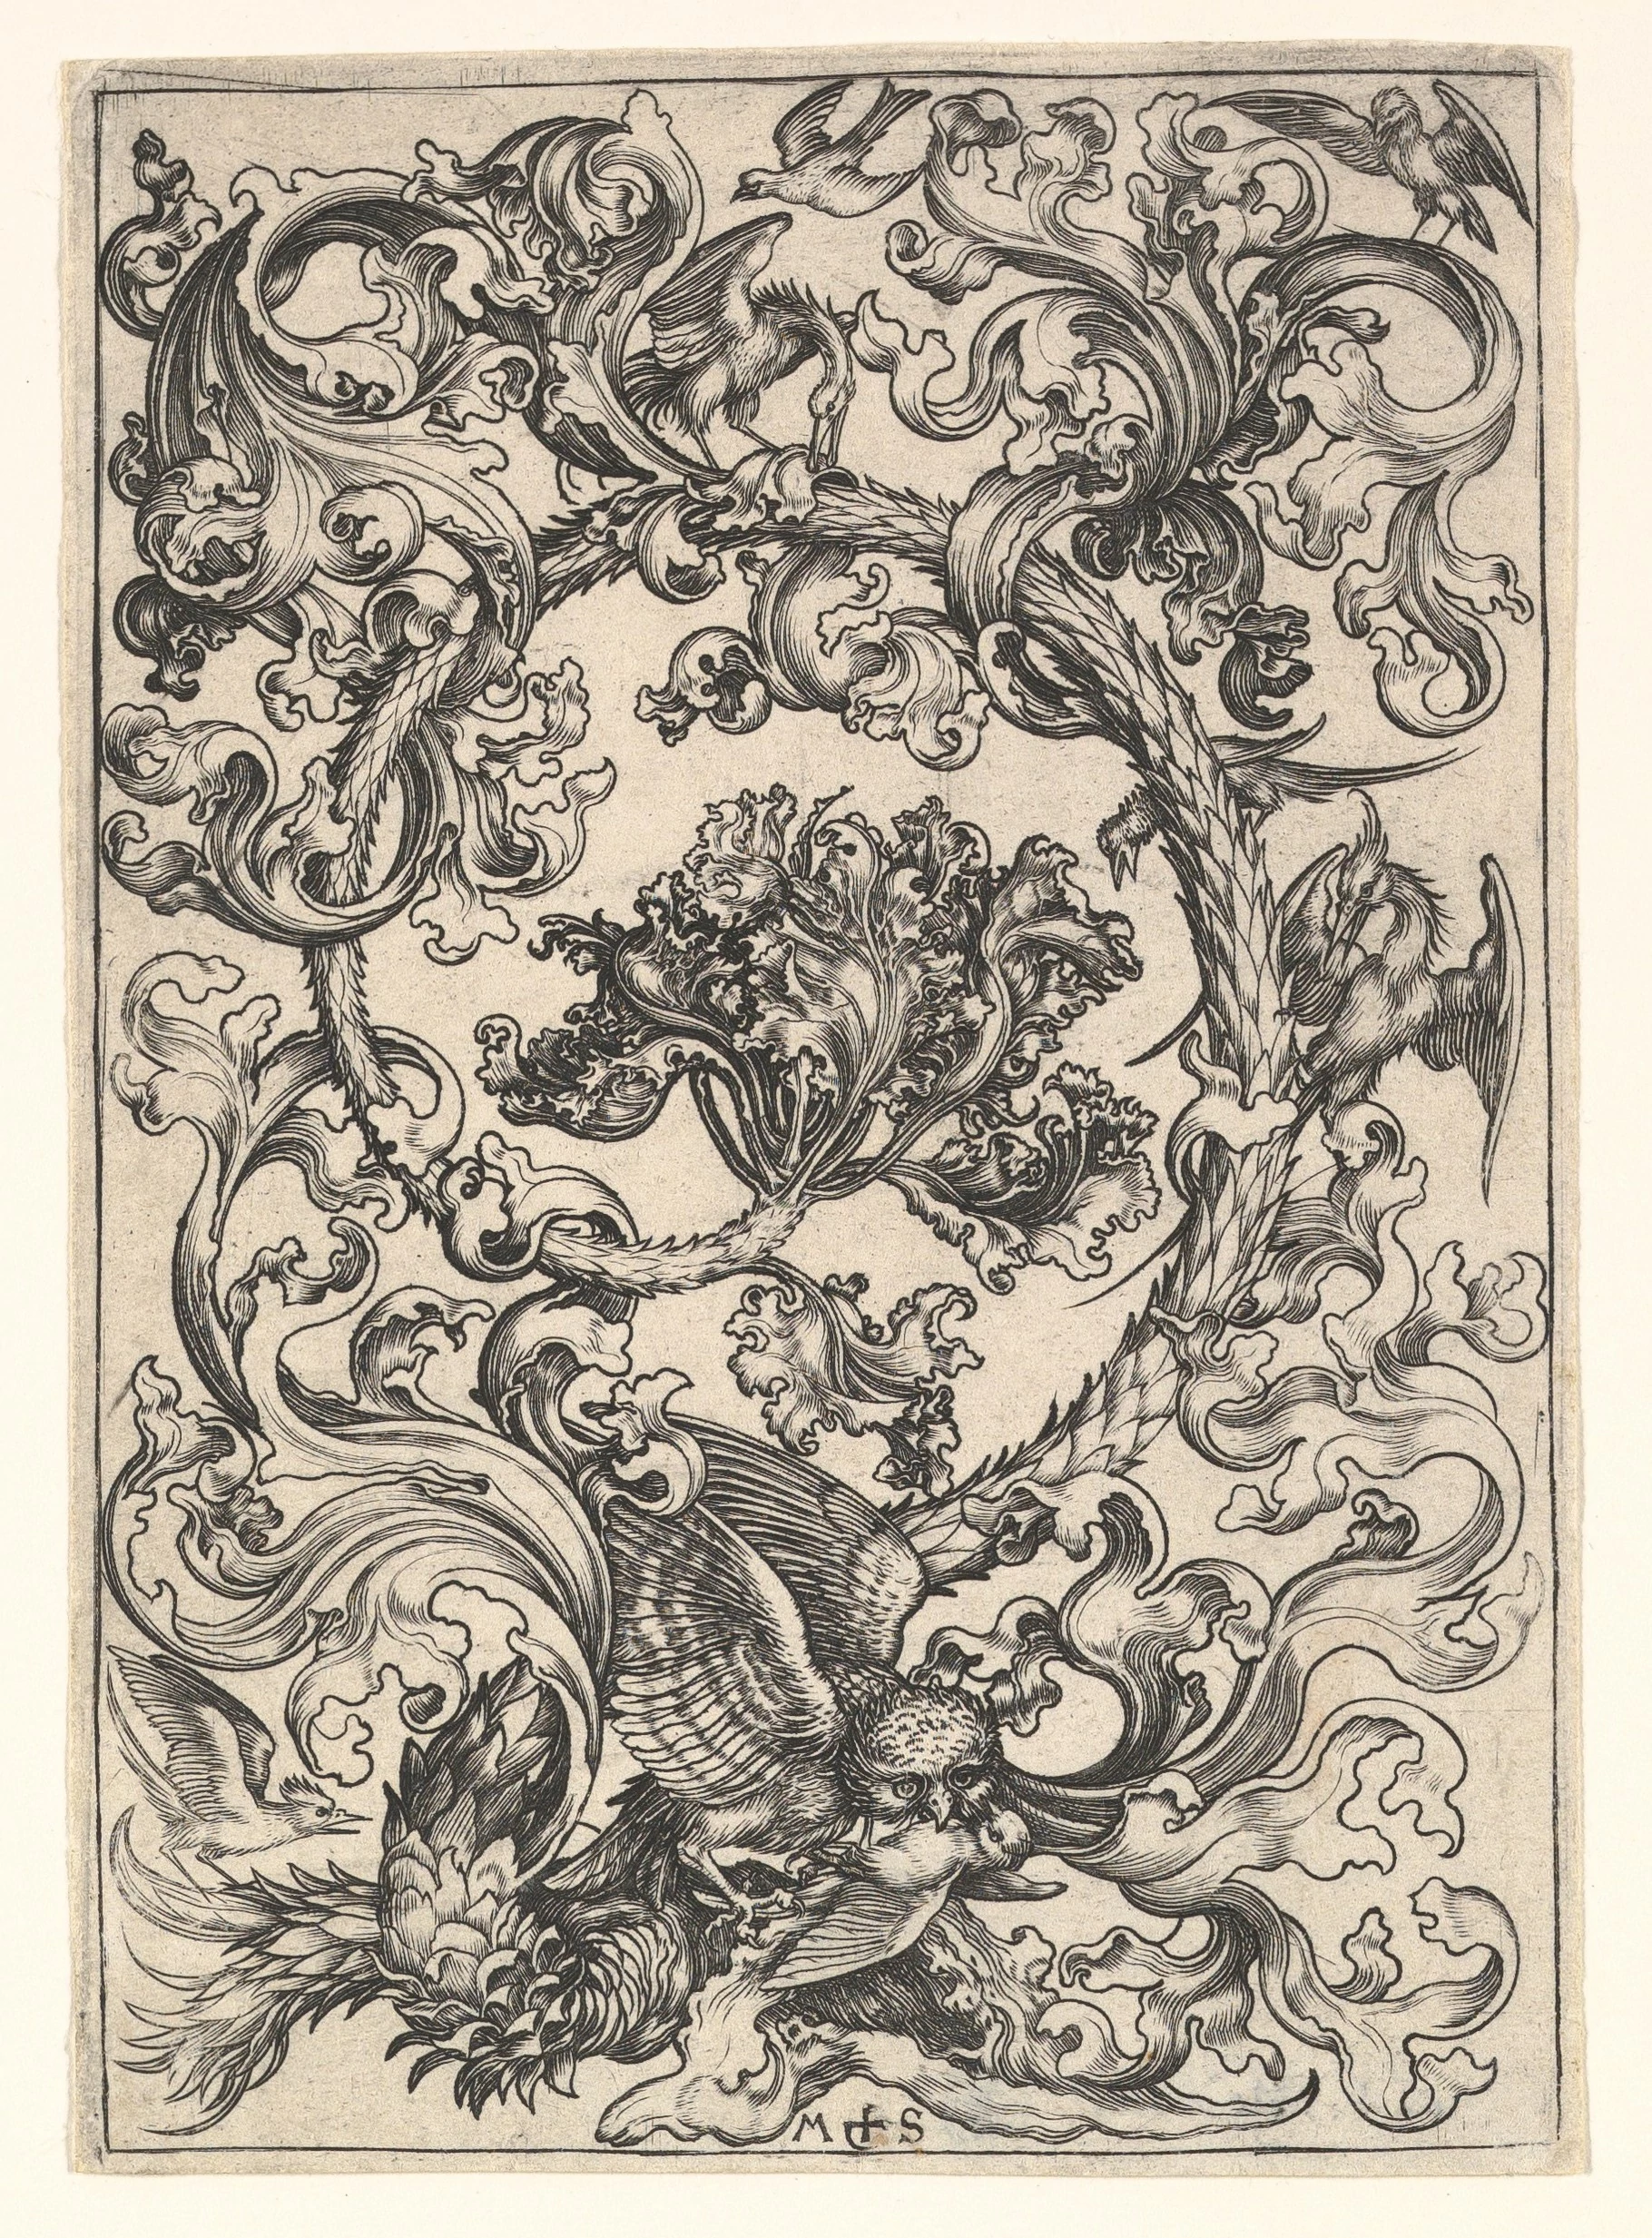 Ornament with Owl Mocked by Day Birds, Martin Schongauer